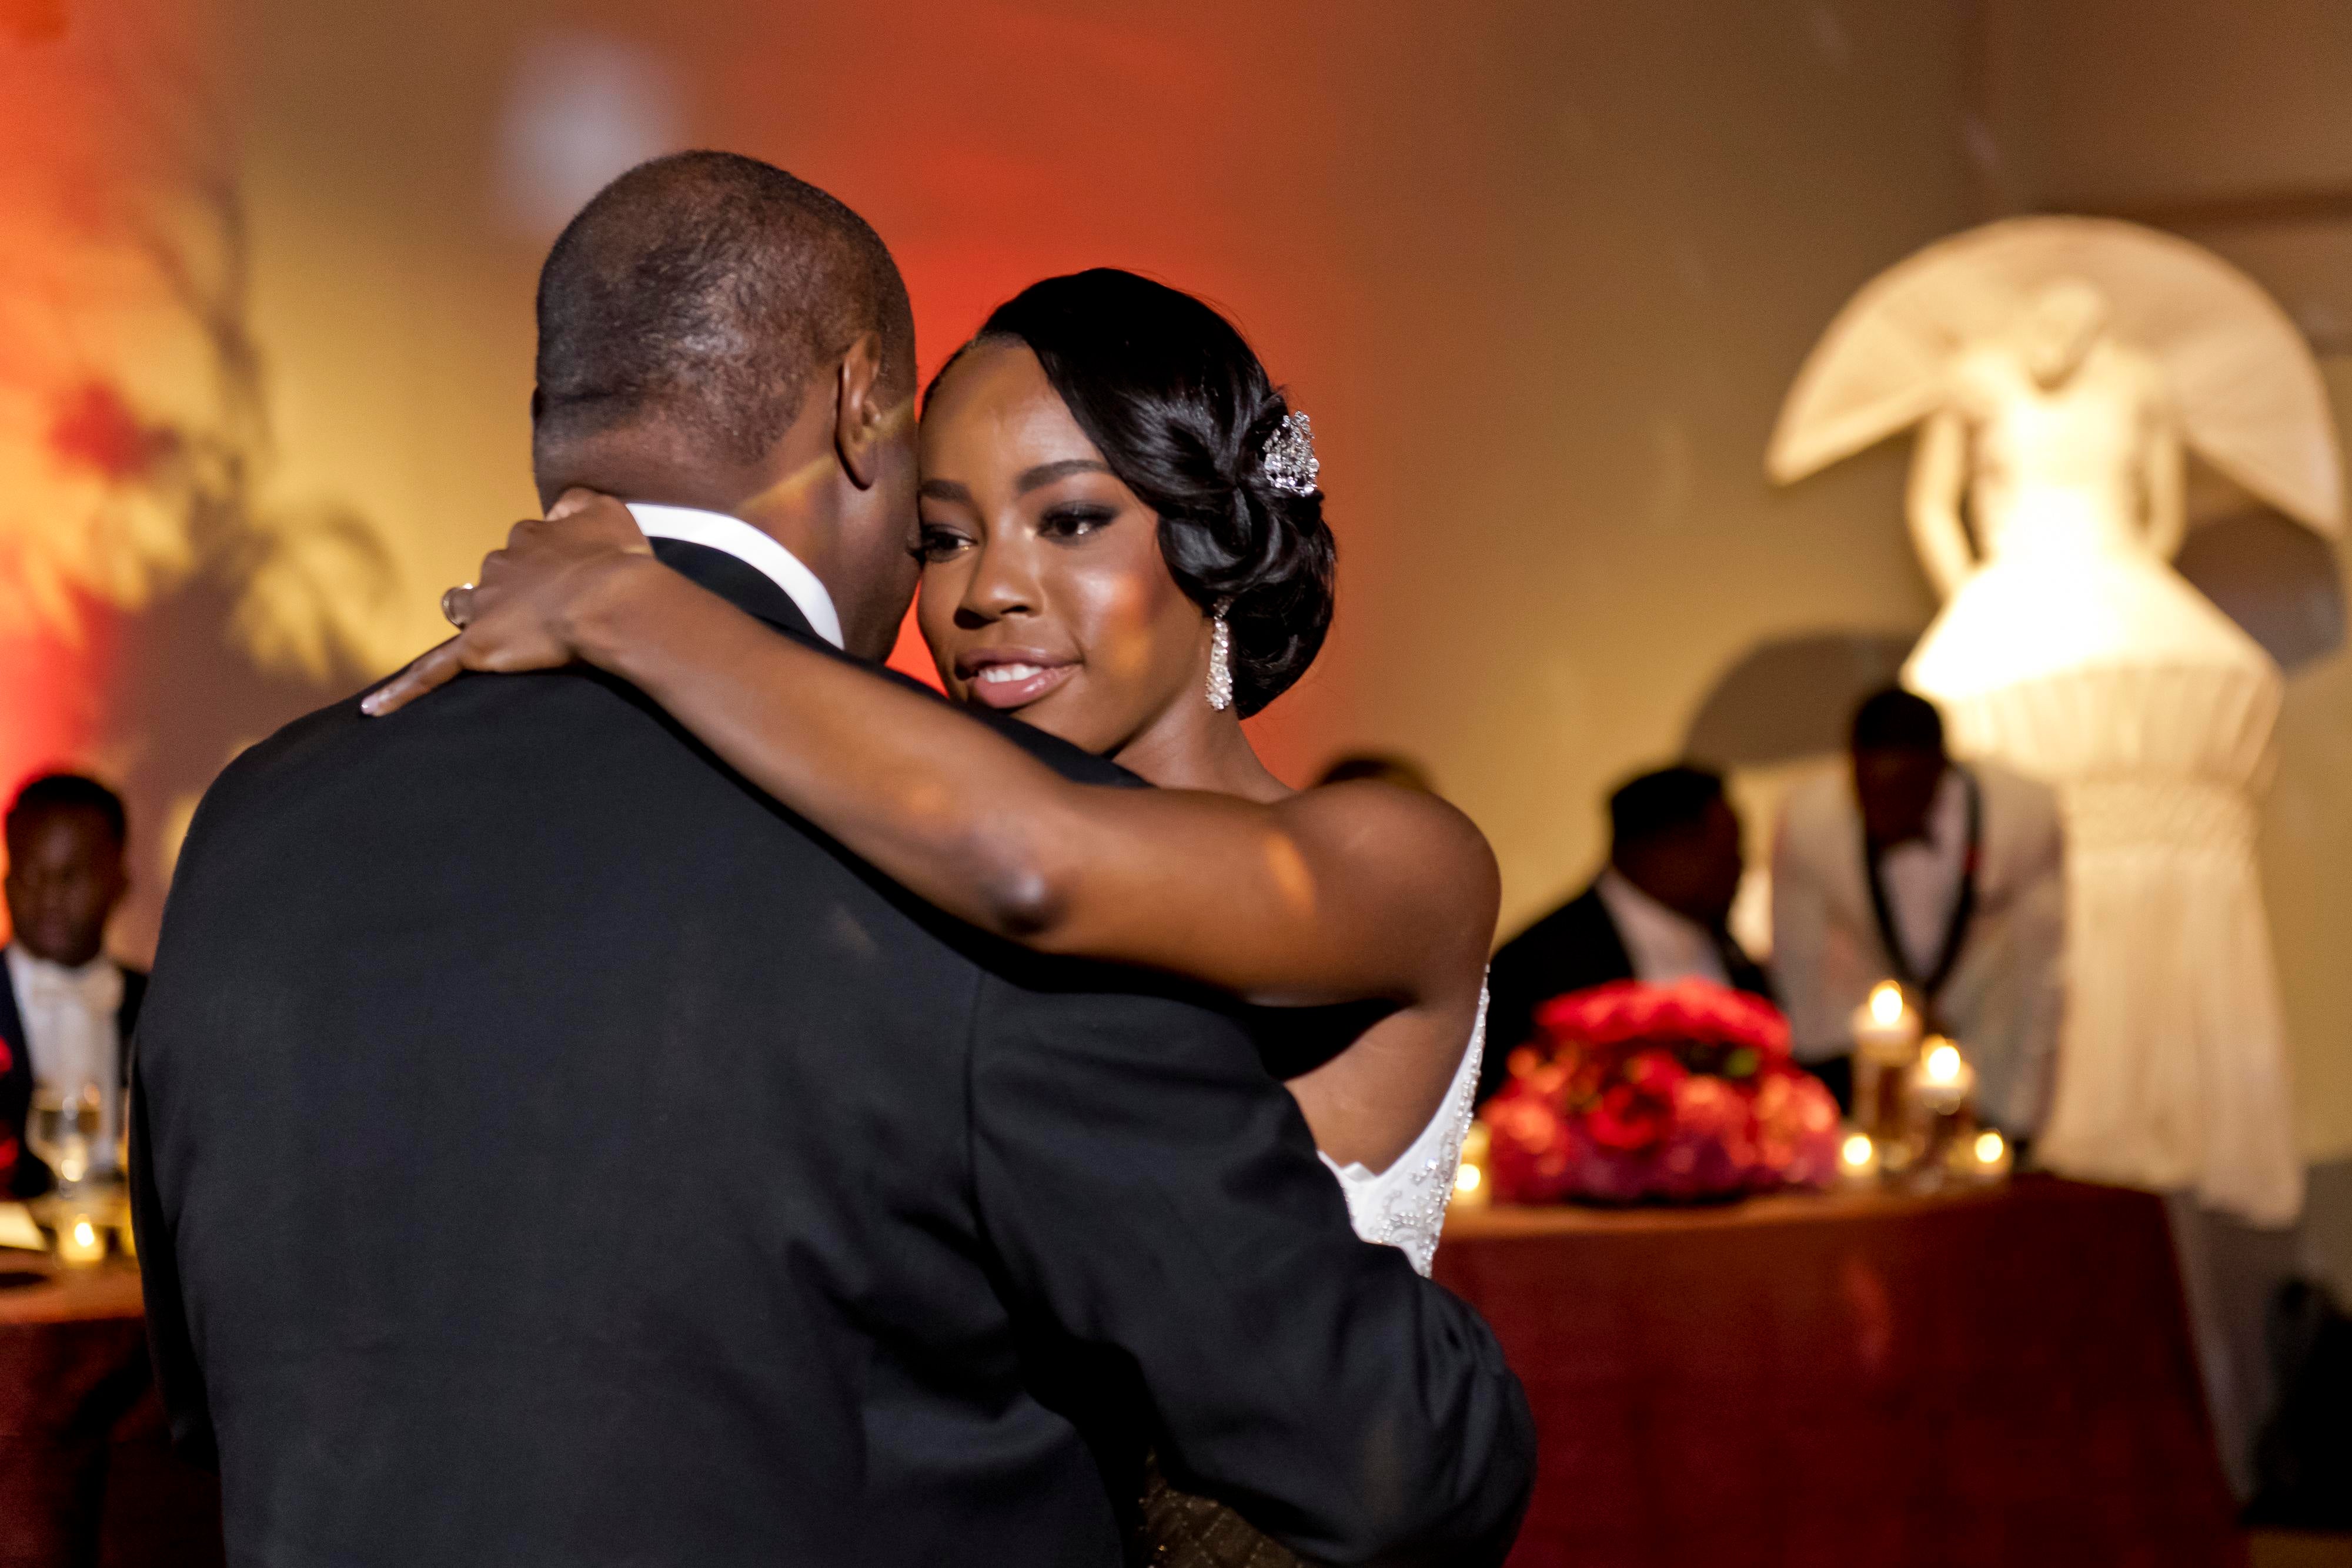 Bridal Bliss: Pierre And Myriam's Wedding In The Gallery Of Amazing Things Was Truly Amazing
